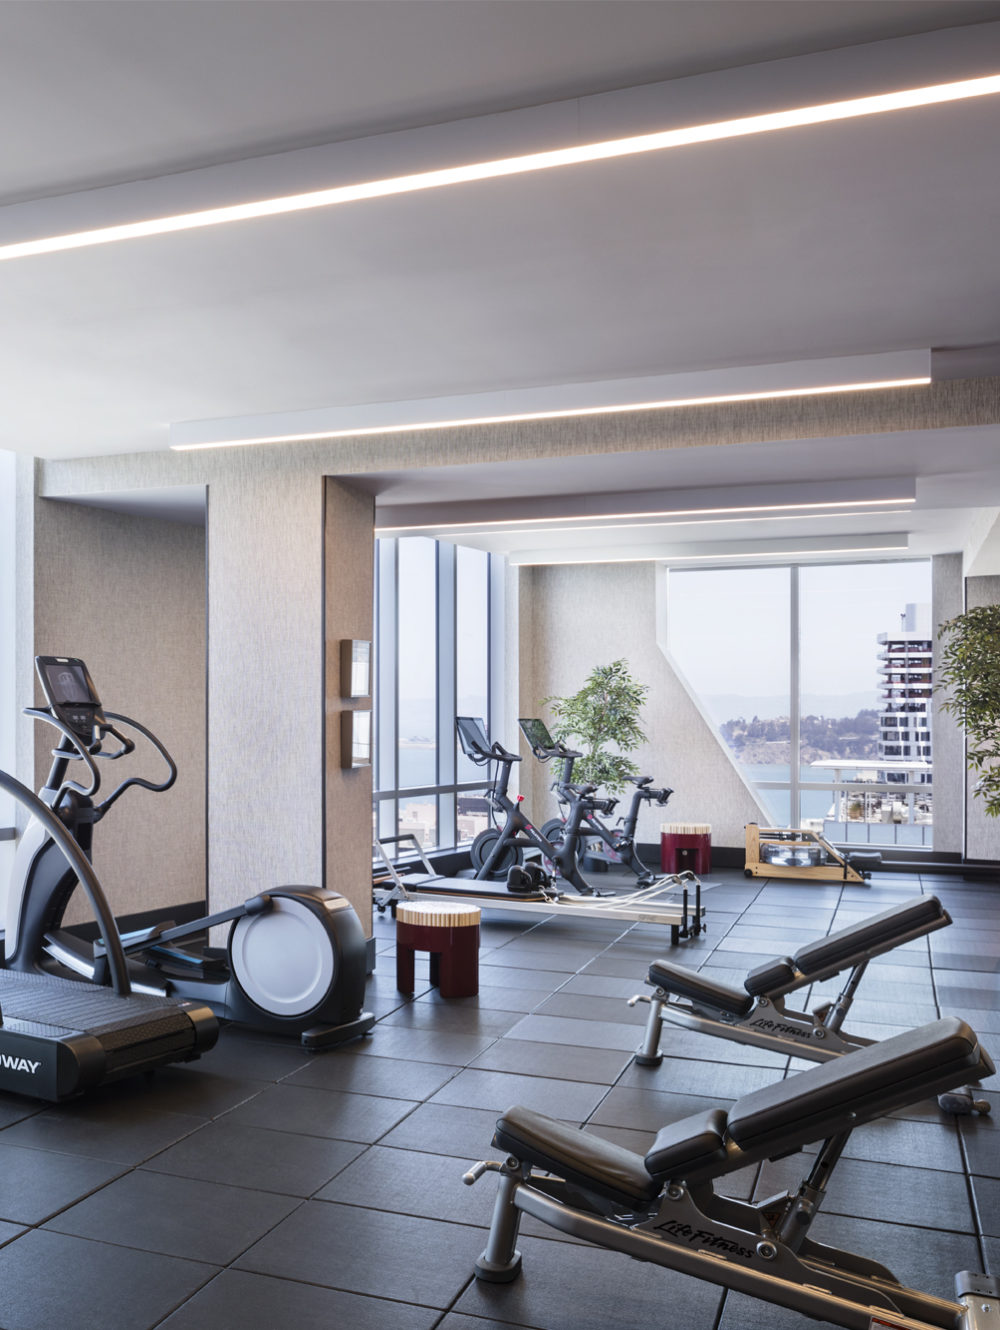 Gym at The Avery luxury condos in San Francisco. Oversized windows lined with treadmills & ellipticals providing city views.